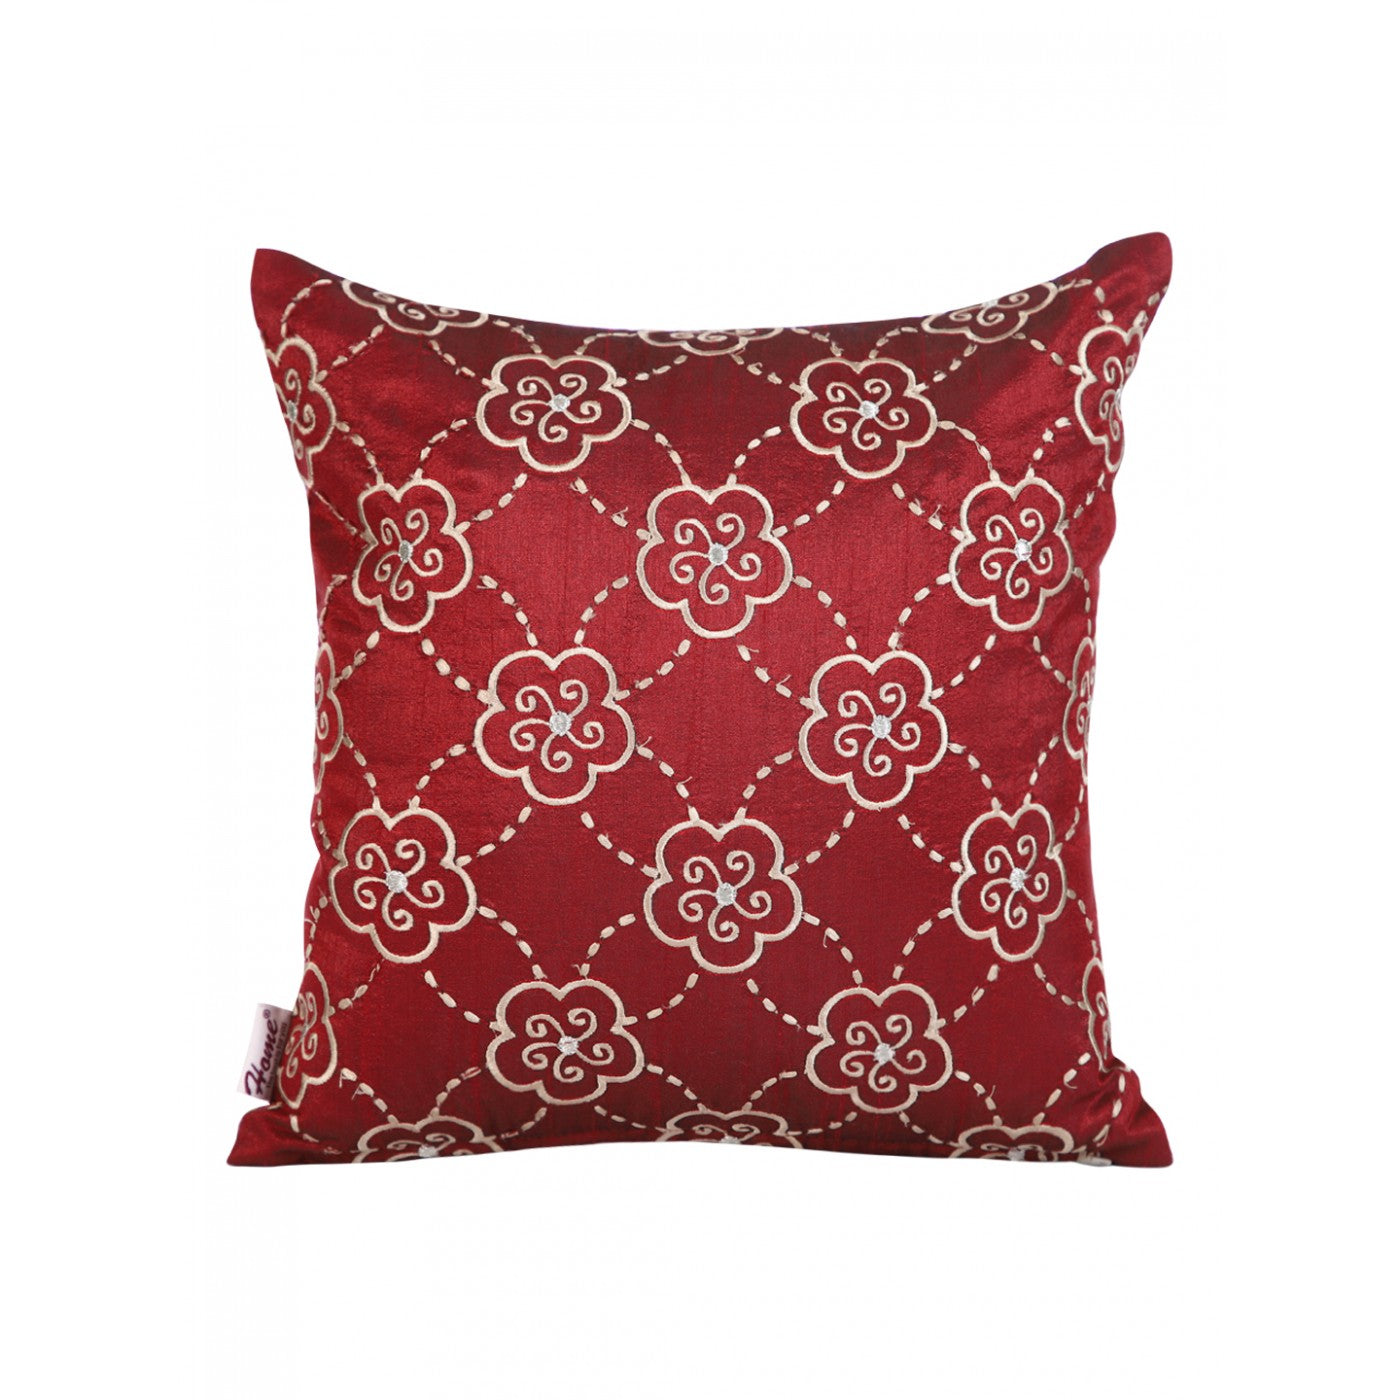 Maroon Dupion Embroidered Elegance Cushion Cover 12x12 Inches